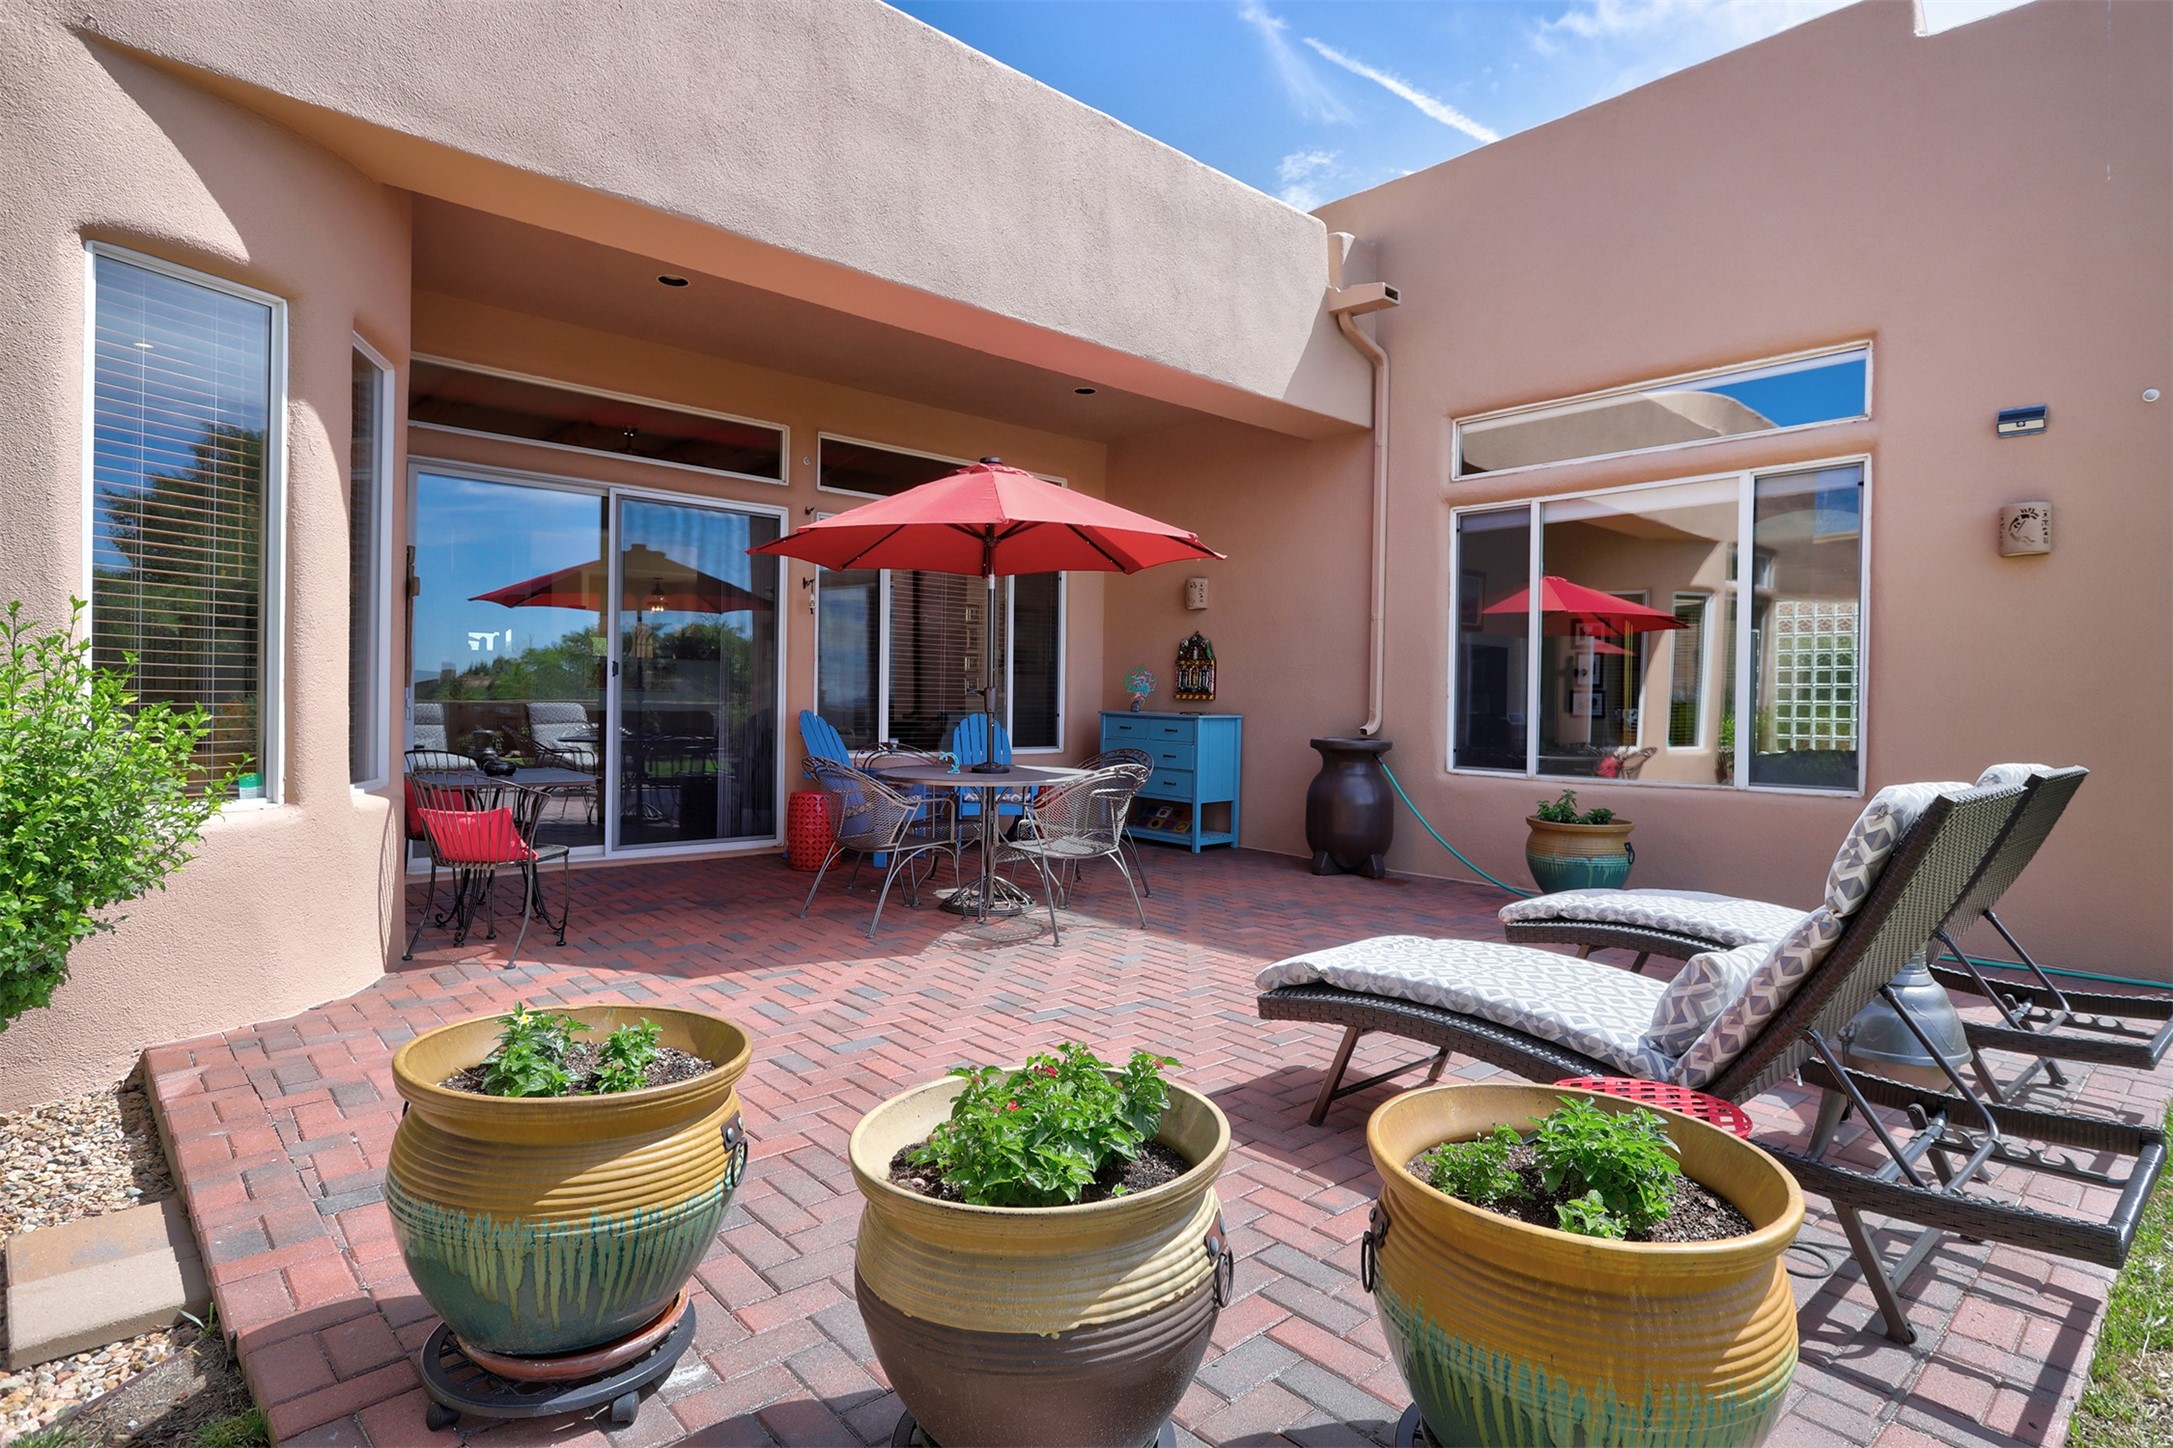 It's Summer!  Enjoy the grand outdoor patio area off the family area.